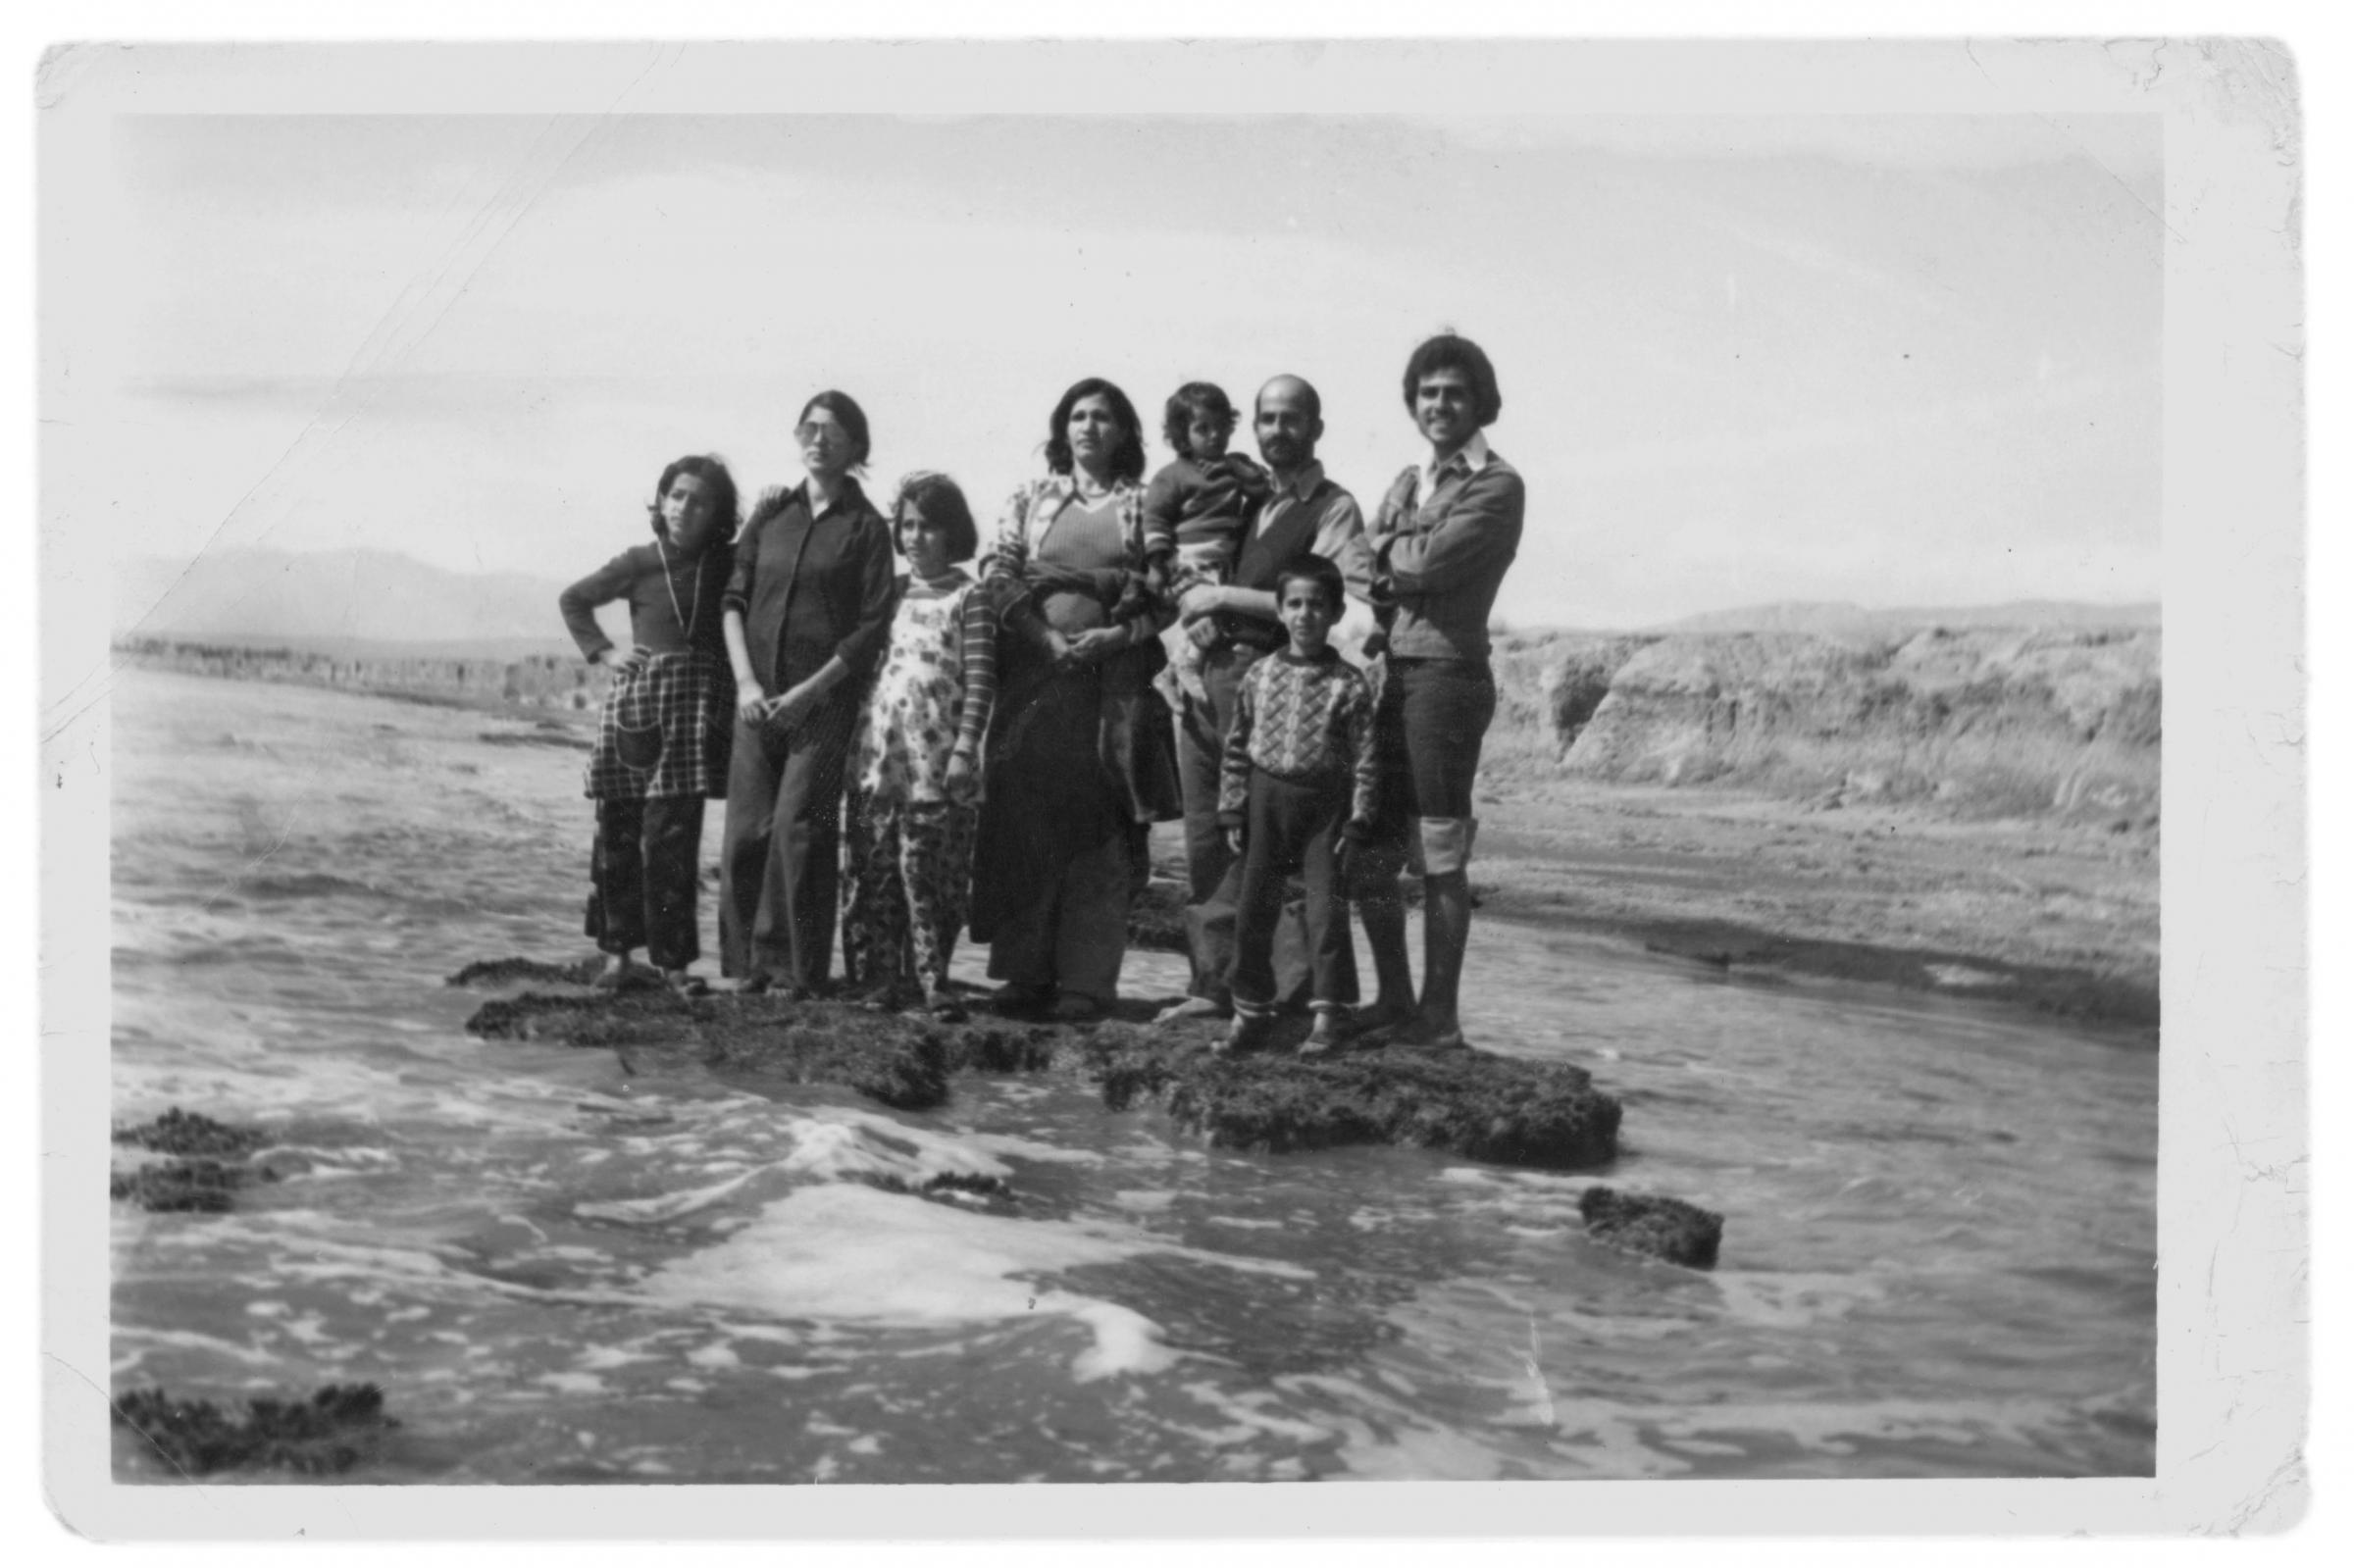 THE EYES OF EARTH (THE DEATH OF LAKE URMIA 2014-ONGOING) -     The Glory Days of Lake Urmia    The photo was taken around 1977 and is one of the oldest...